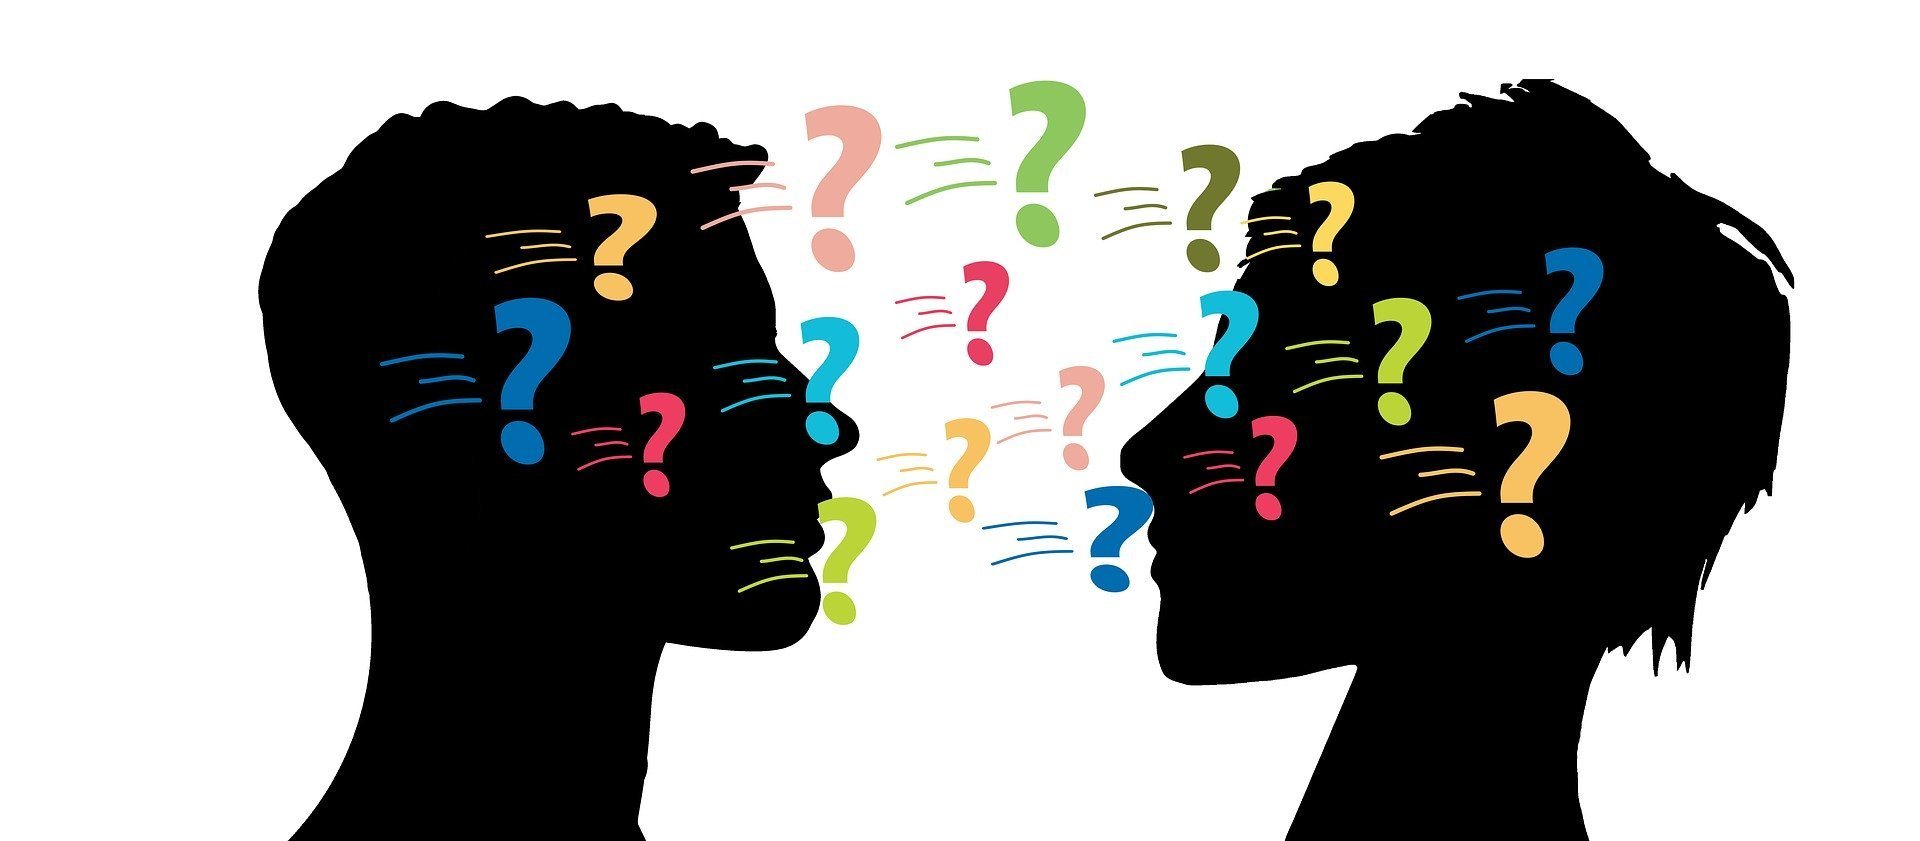 Asking good questions eliminates customer anxiety